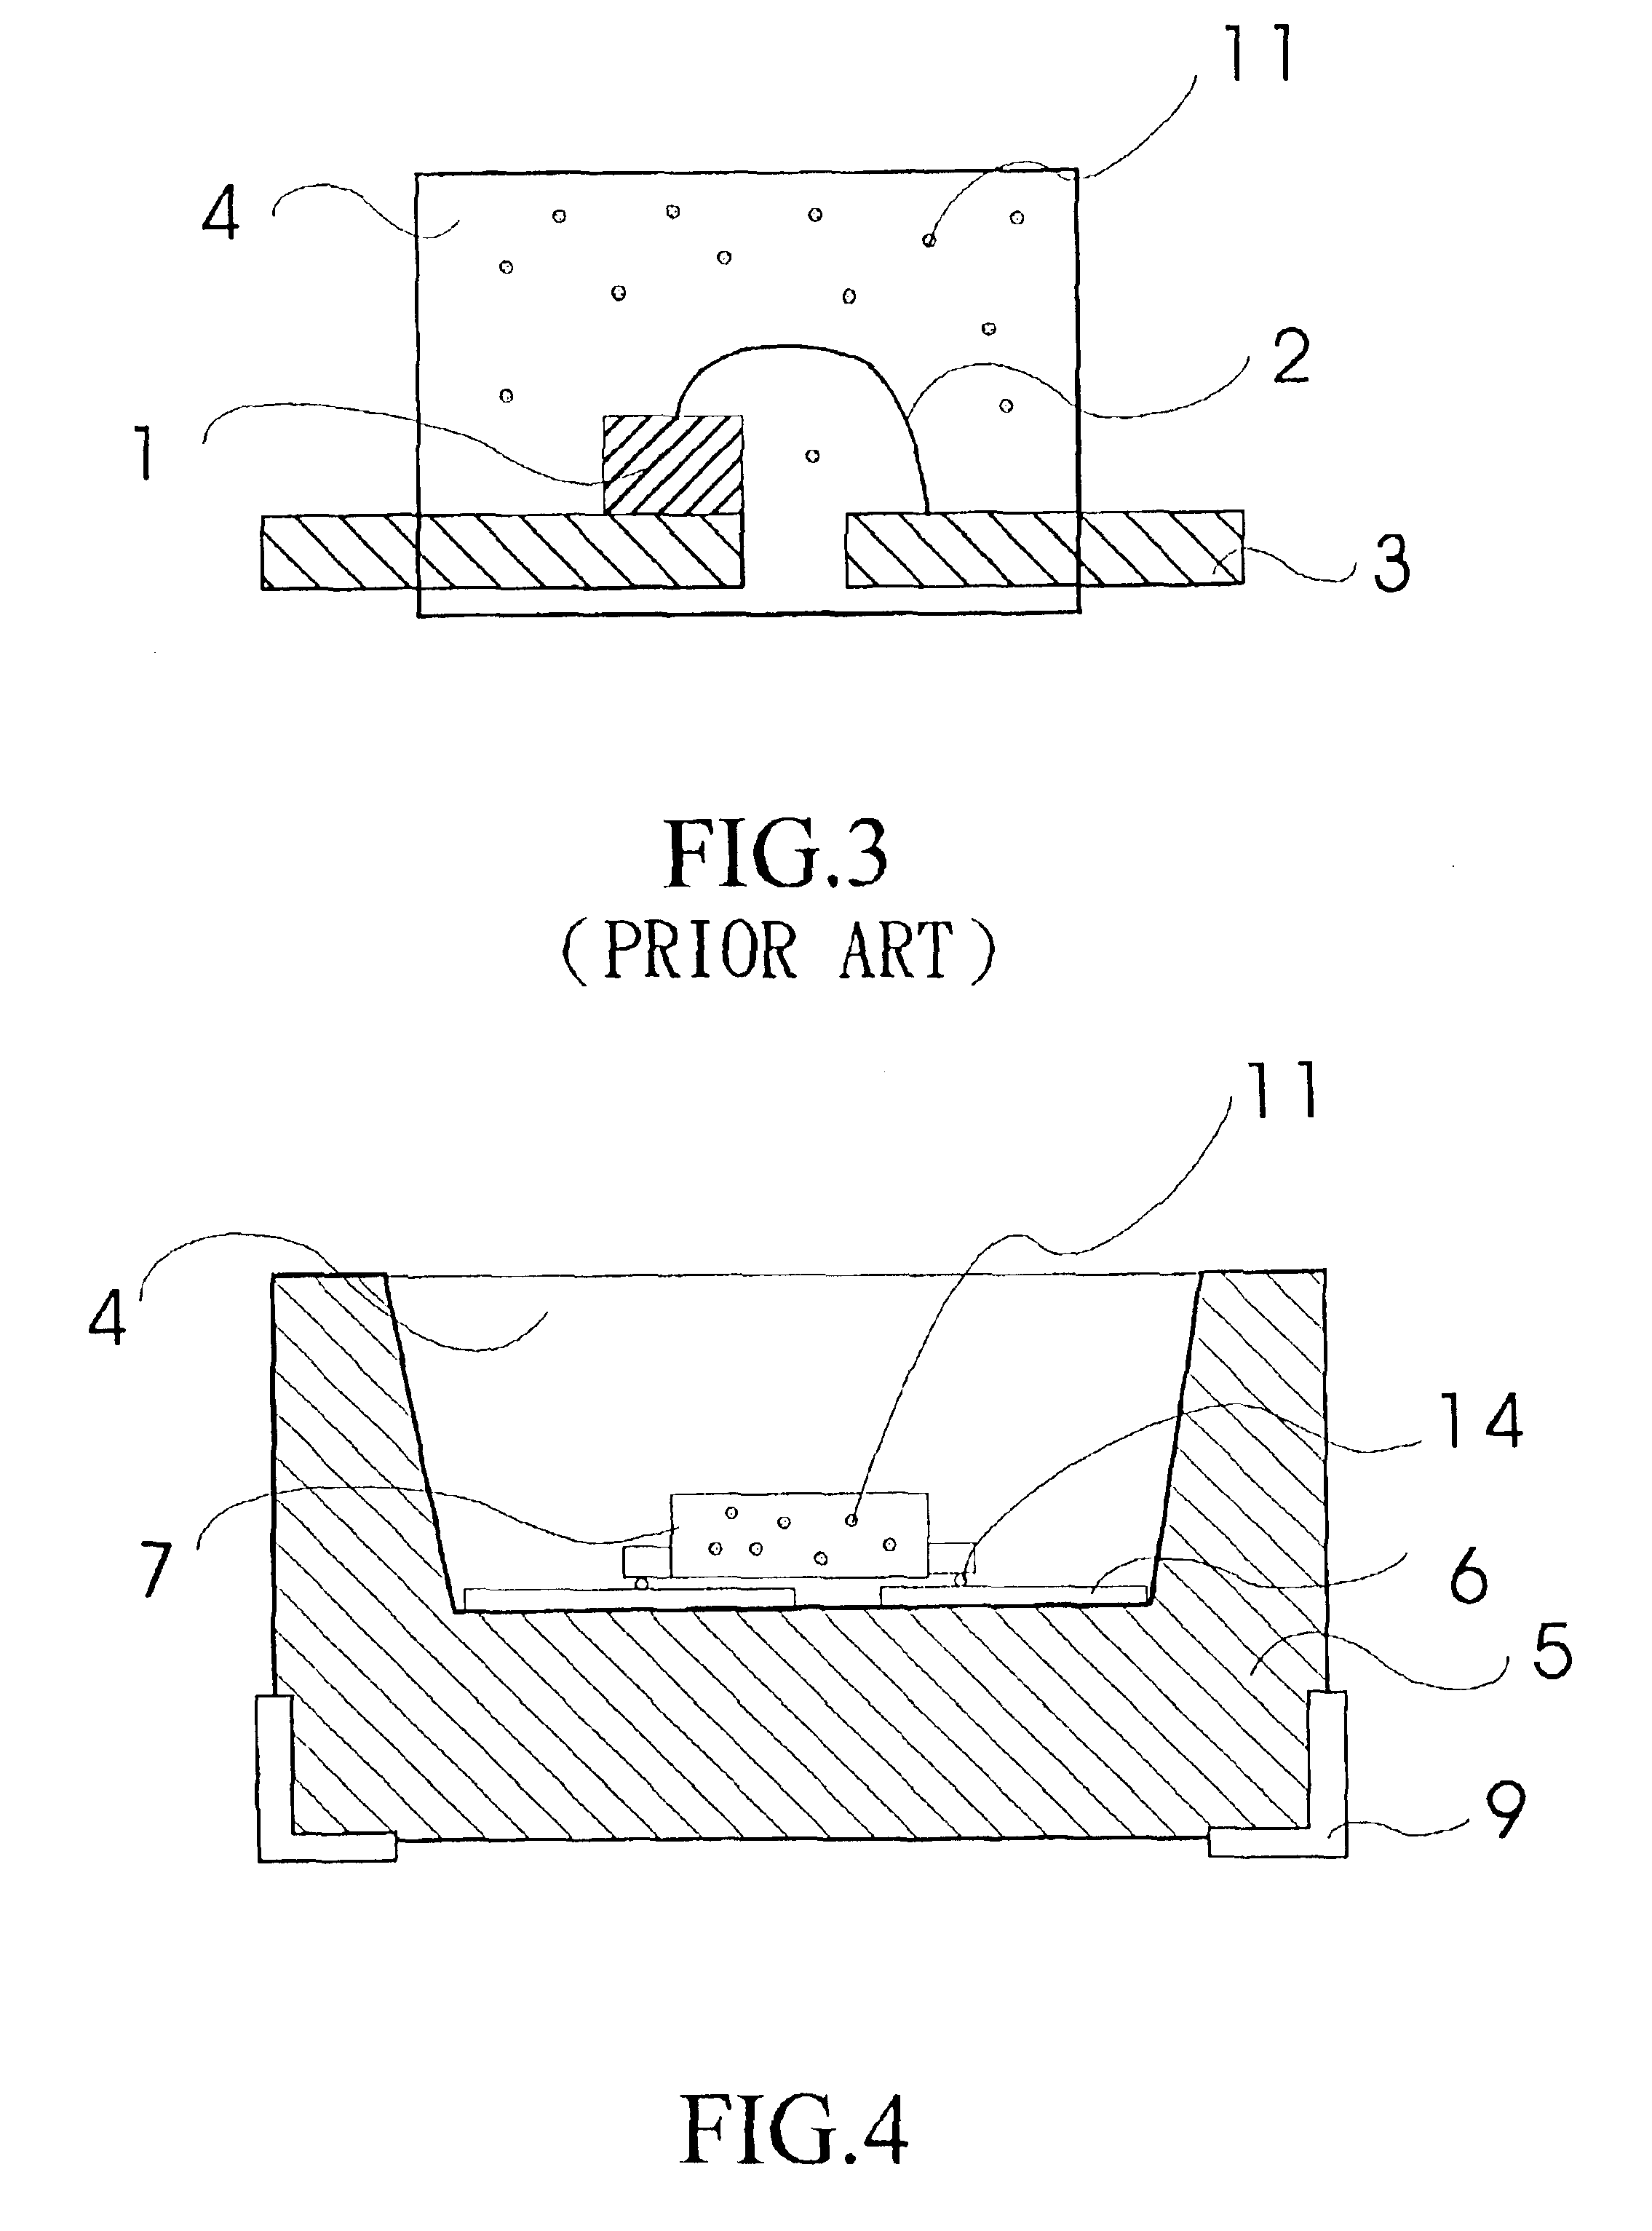 Package structure of a composite LED